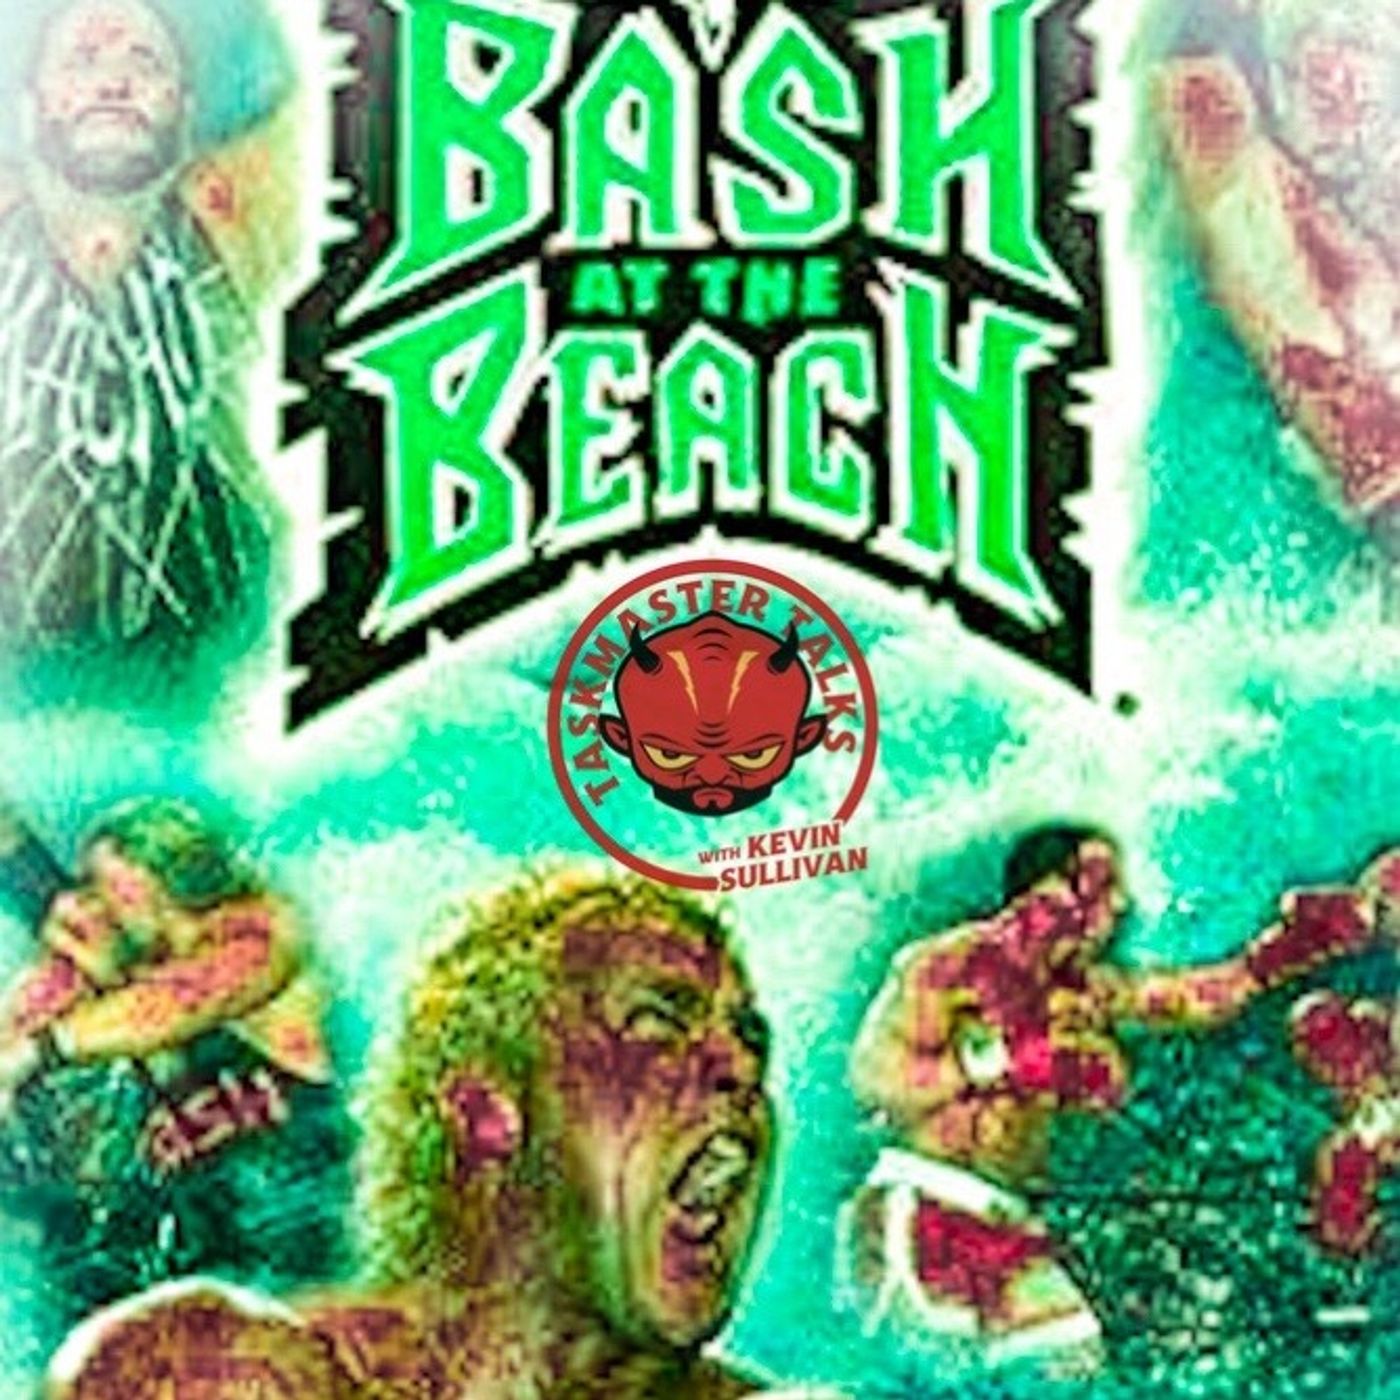 Episode 106: WCW Bash At The Beach '99